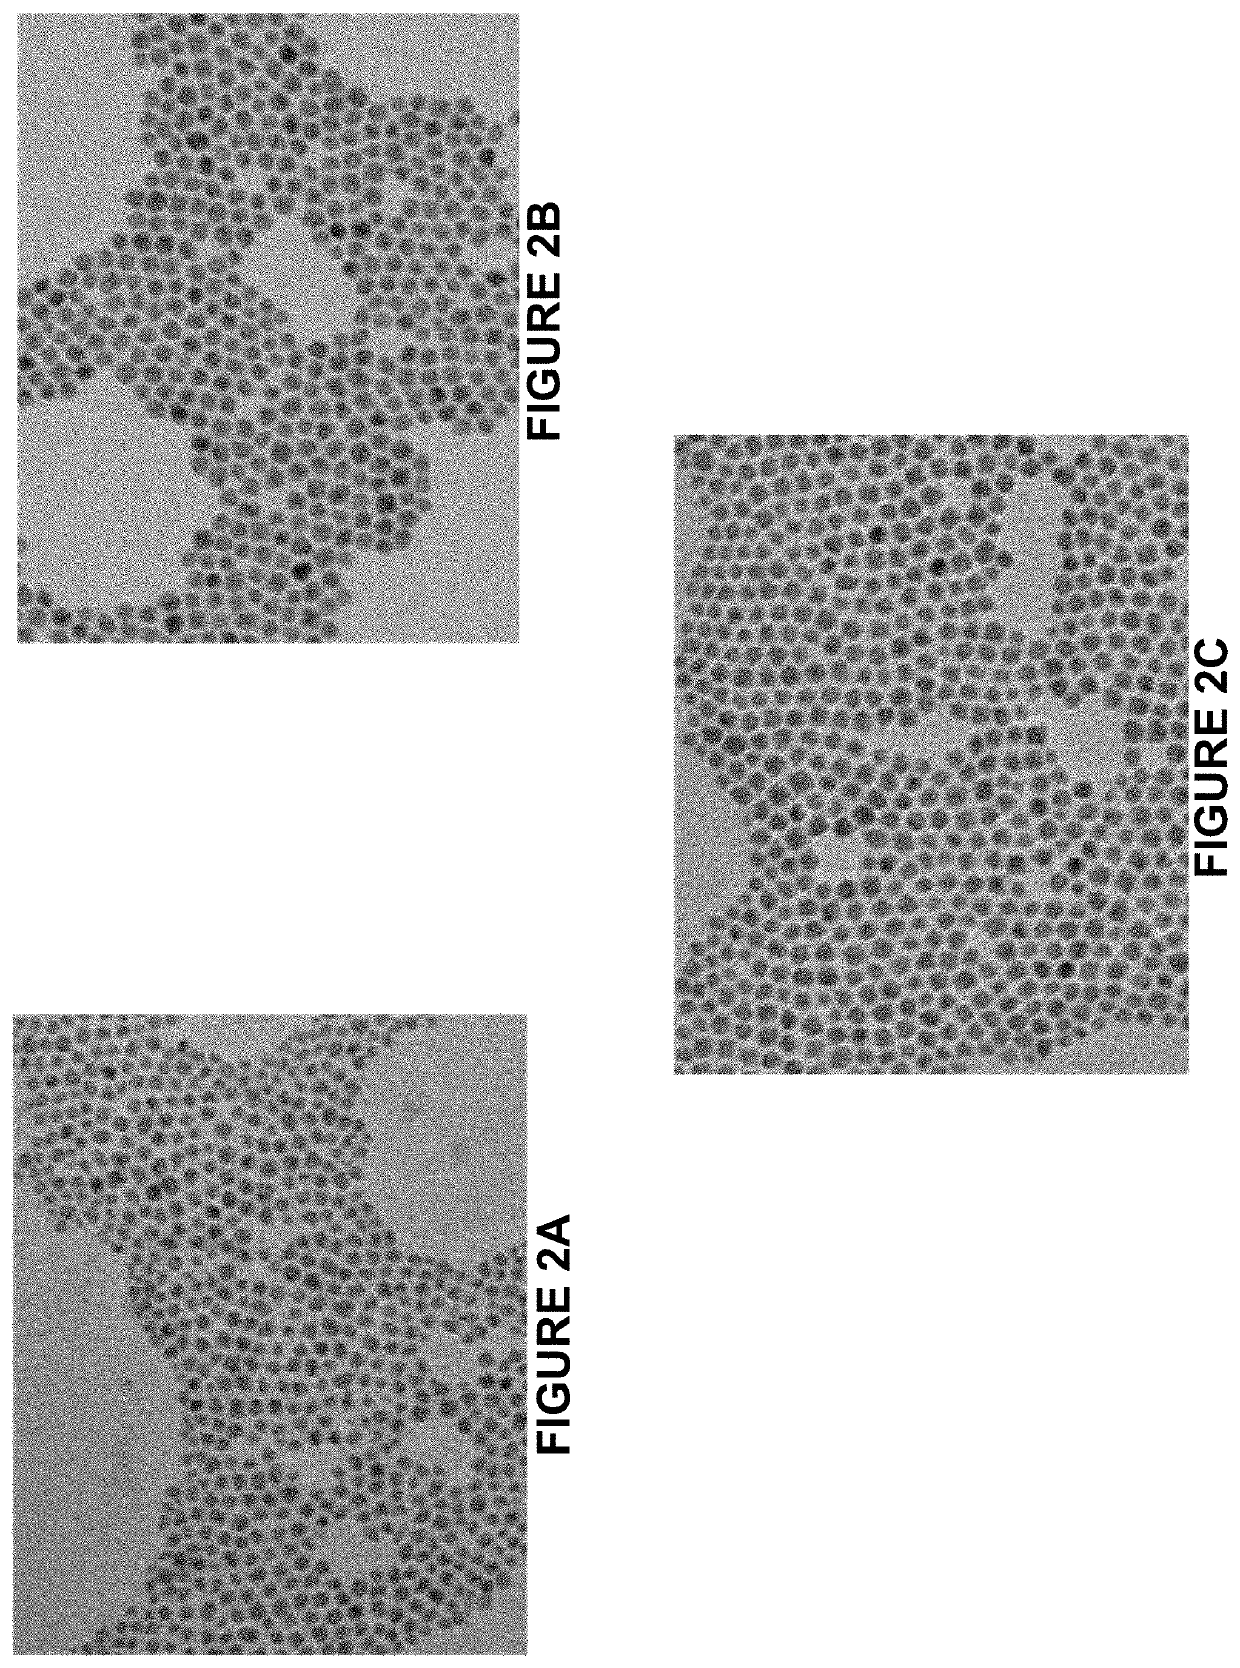 Films comprising bright silver based quaternary nanostructures